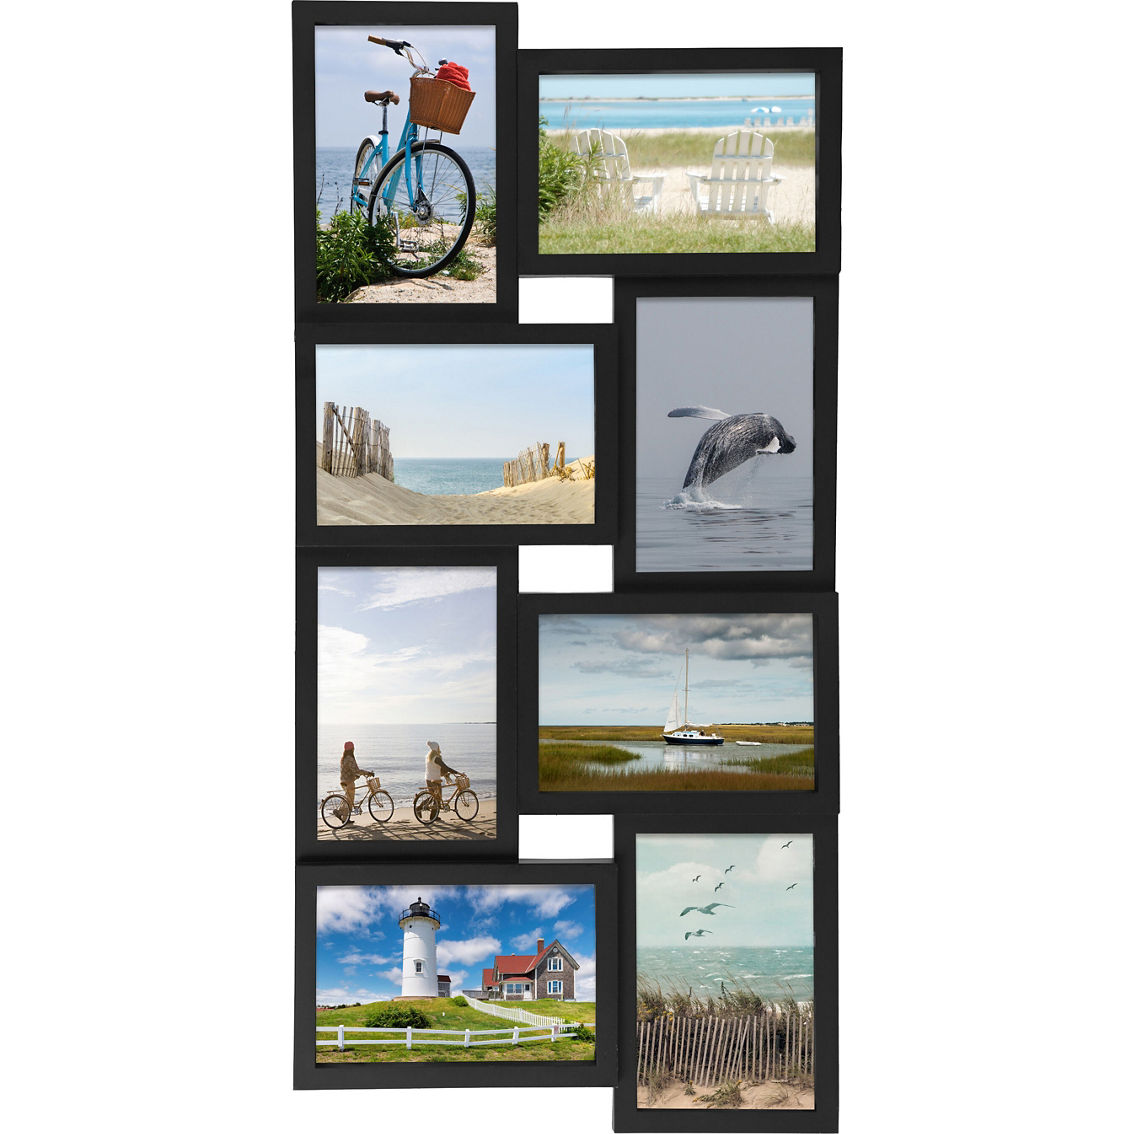 Melannco 24 x 12 in. 8 Opening Photo Collage Frame - Image 3 of 6